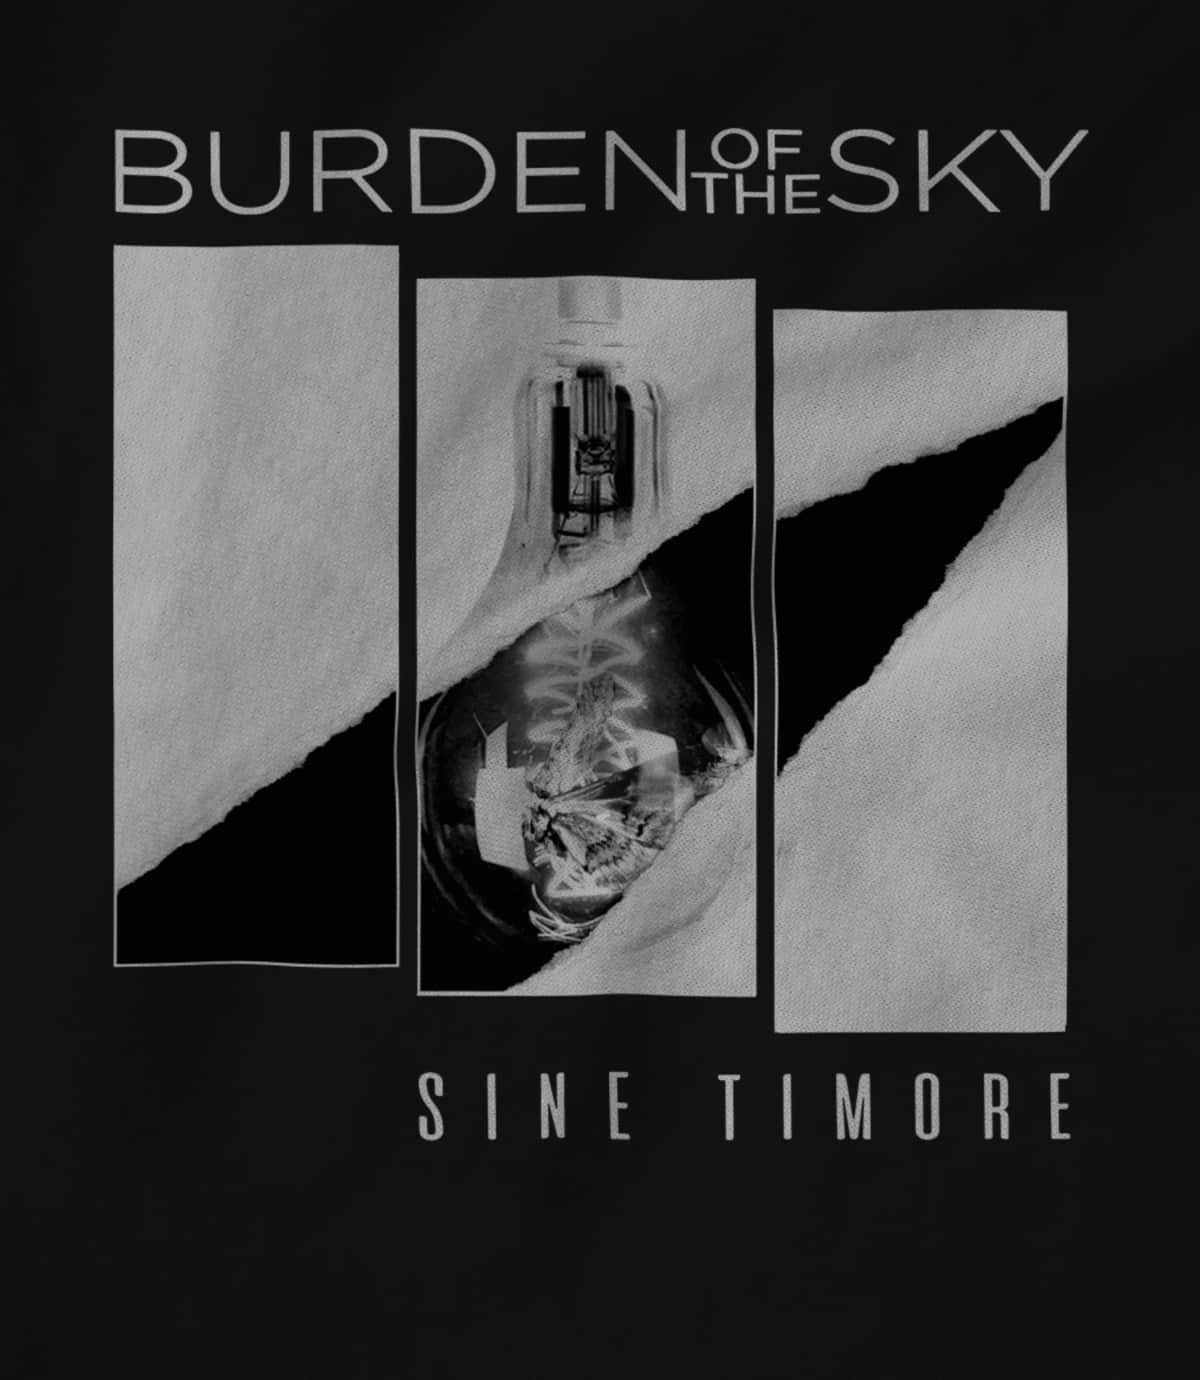 Burden of the sky sine timore red 1556256684